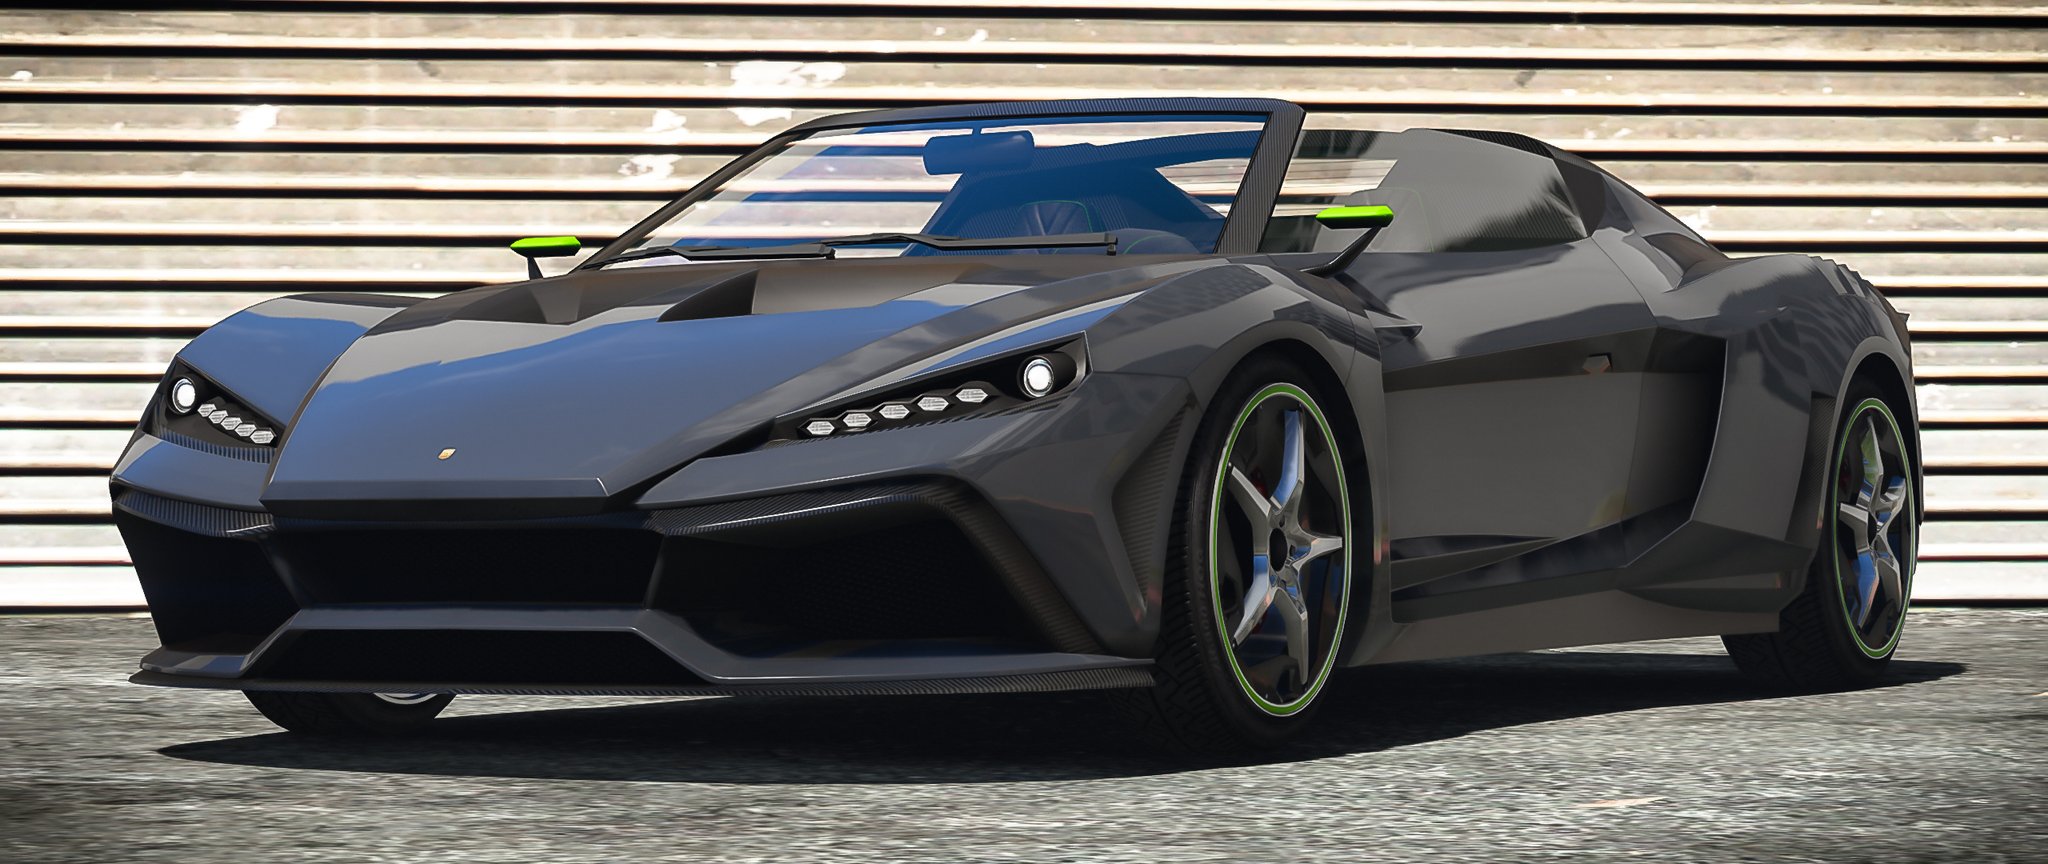 Gta Online Event Week The Zorrusso Is Now Available.